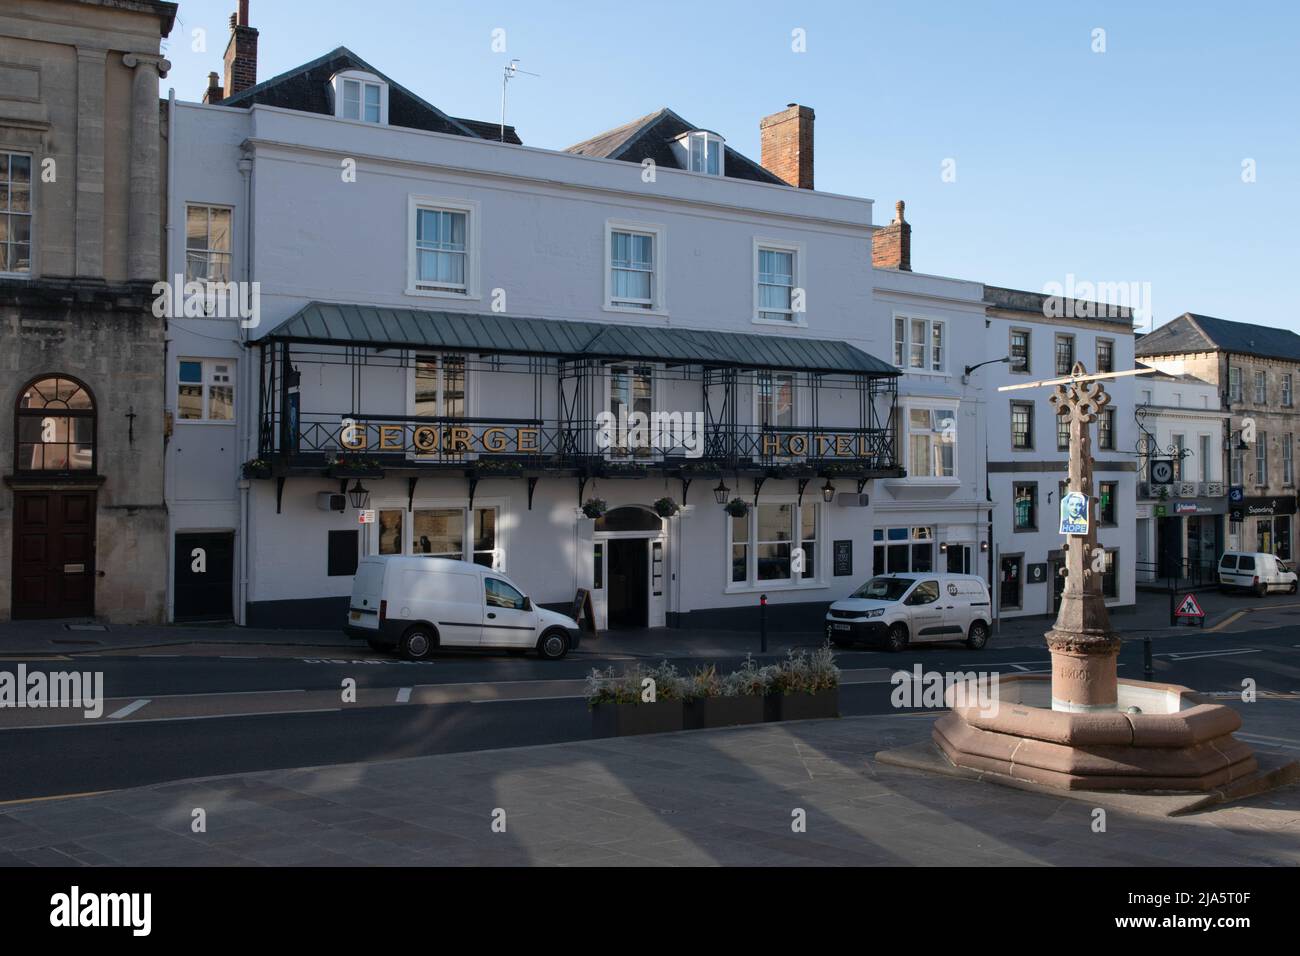 The George Hotel, Frome town centre, Somerset, England, UK Stock Photo